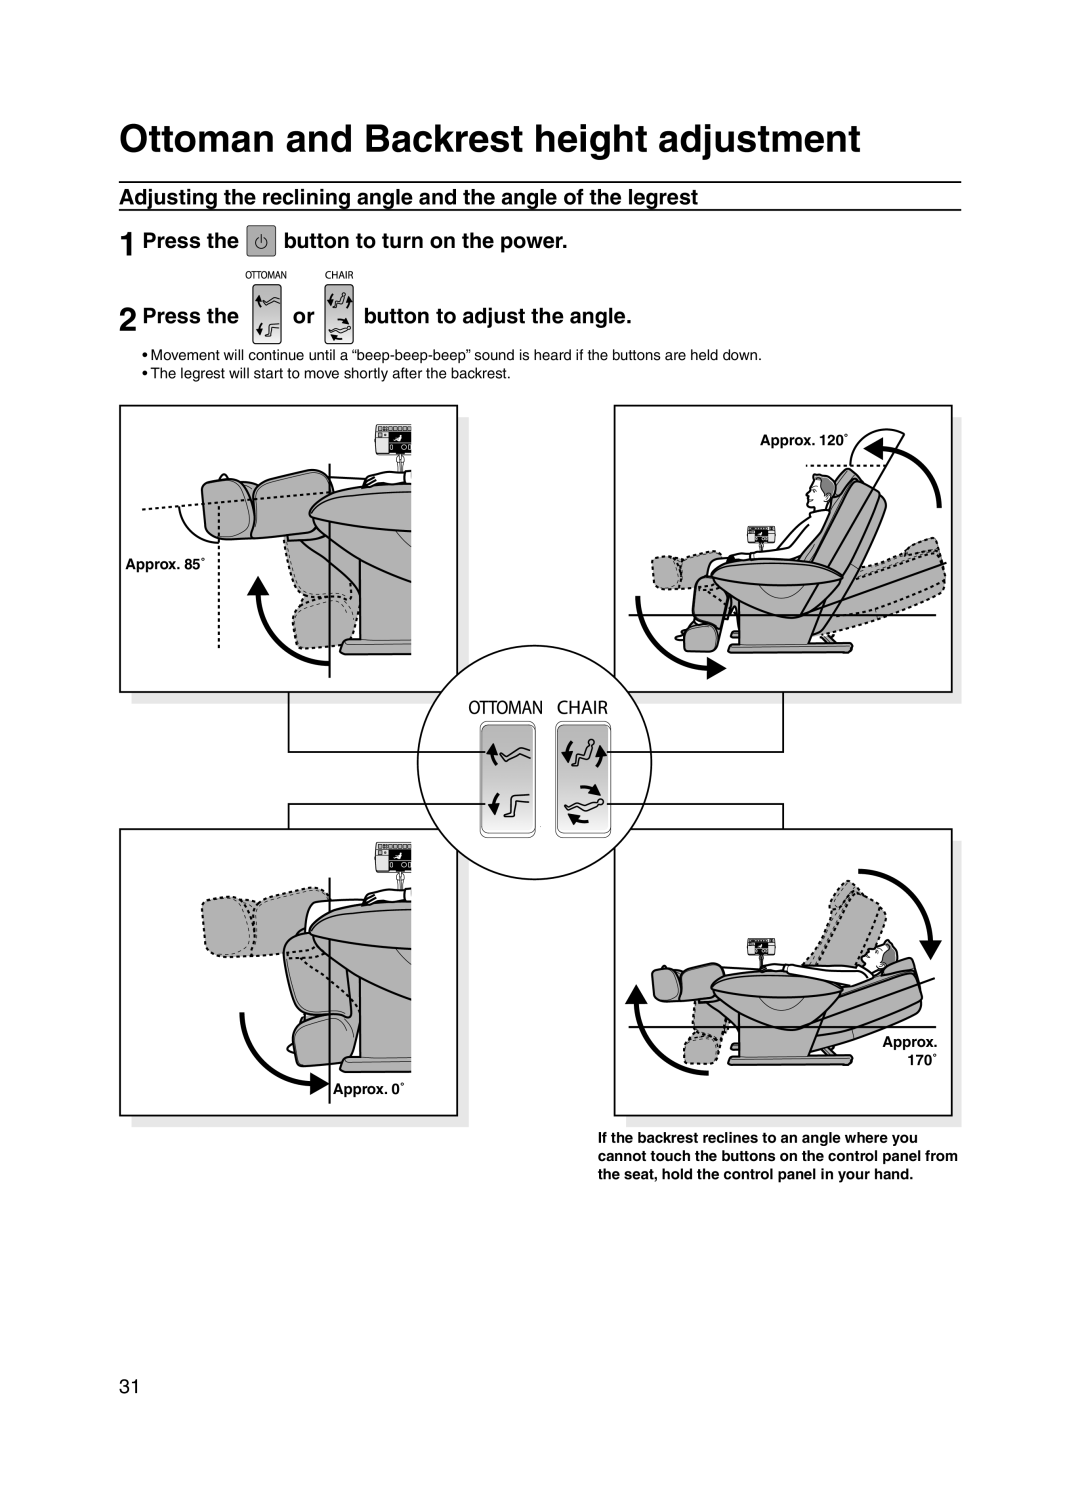 Panasonic 30003 manual Ottoman and Backrest height adjustment, Press the or button to adjust the angle 